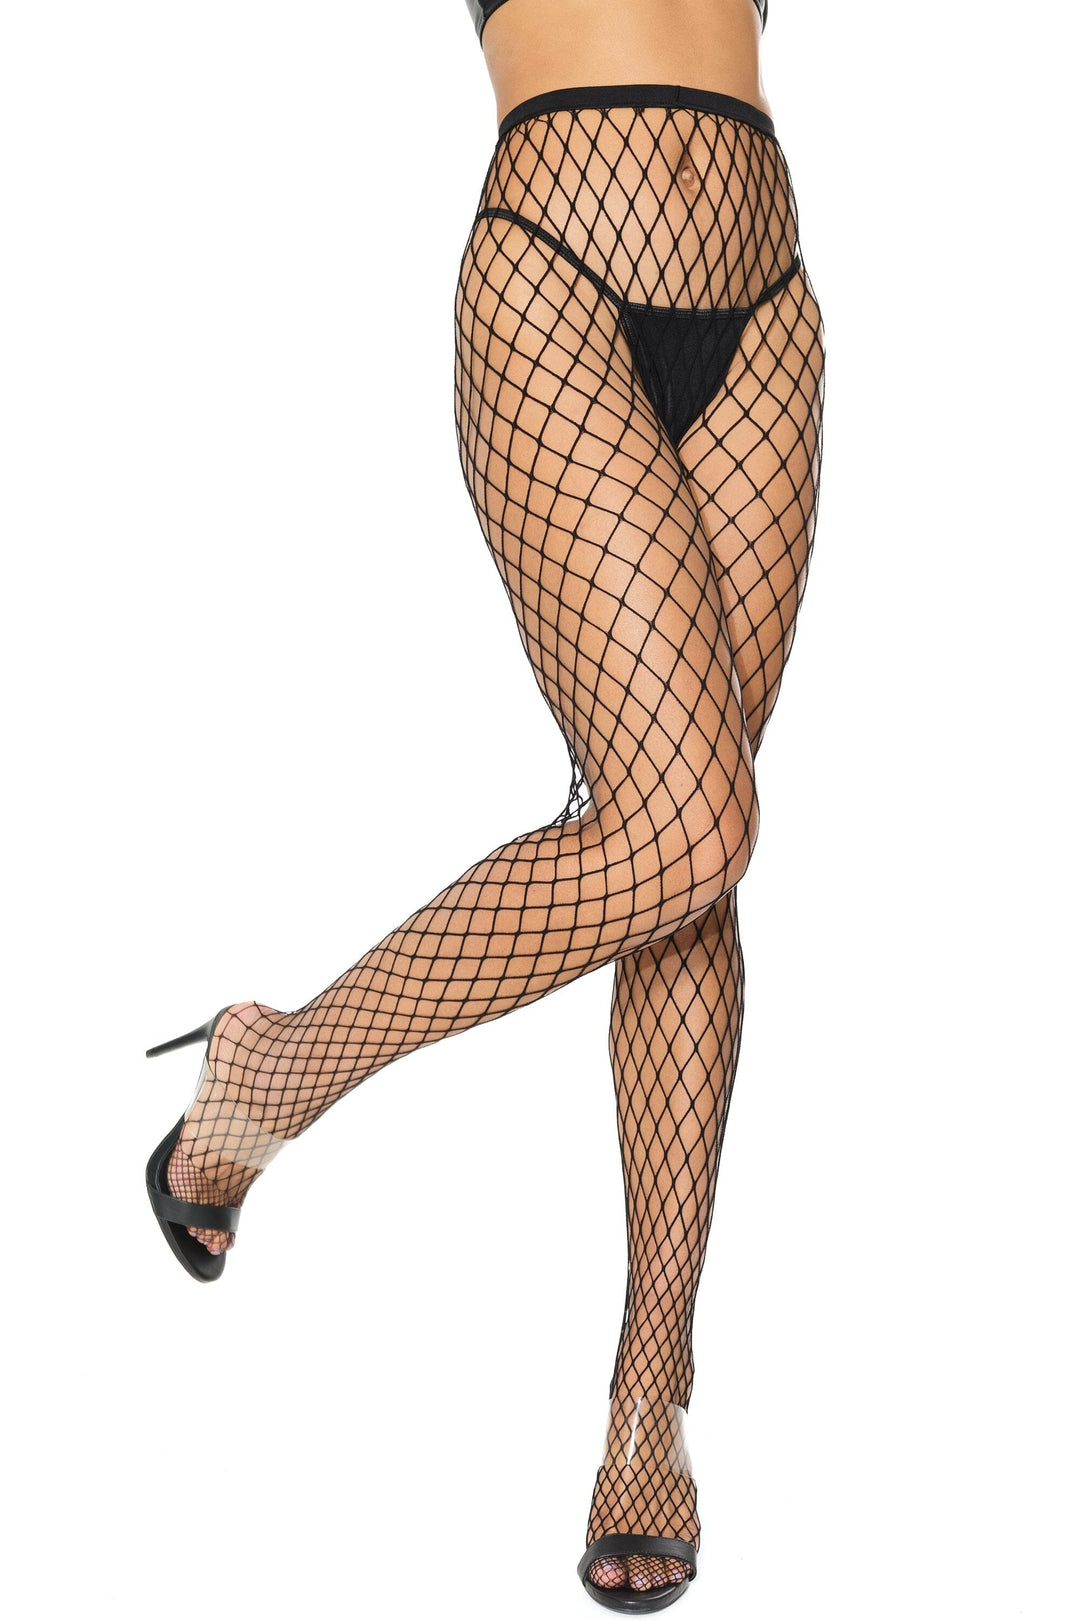 Fishnetted Pantyhose-Pantyhose-Coquette-Black-O/S-SEXYSHOES.COM